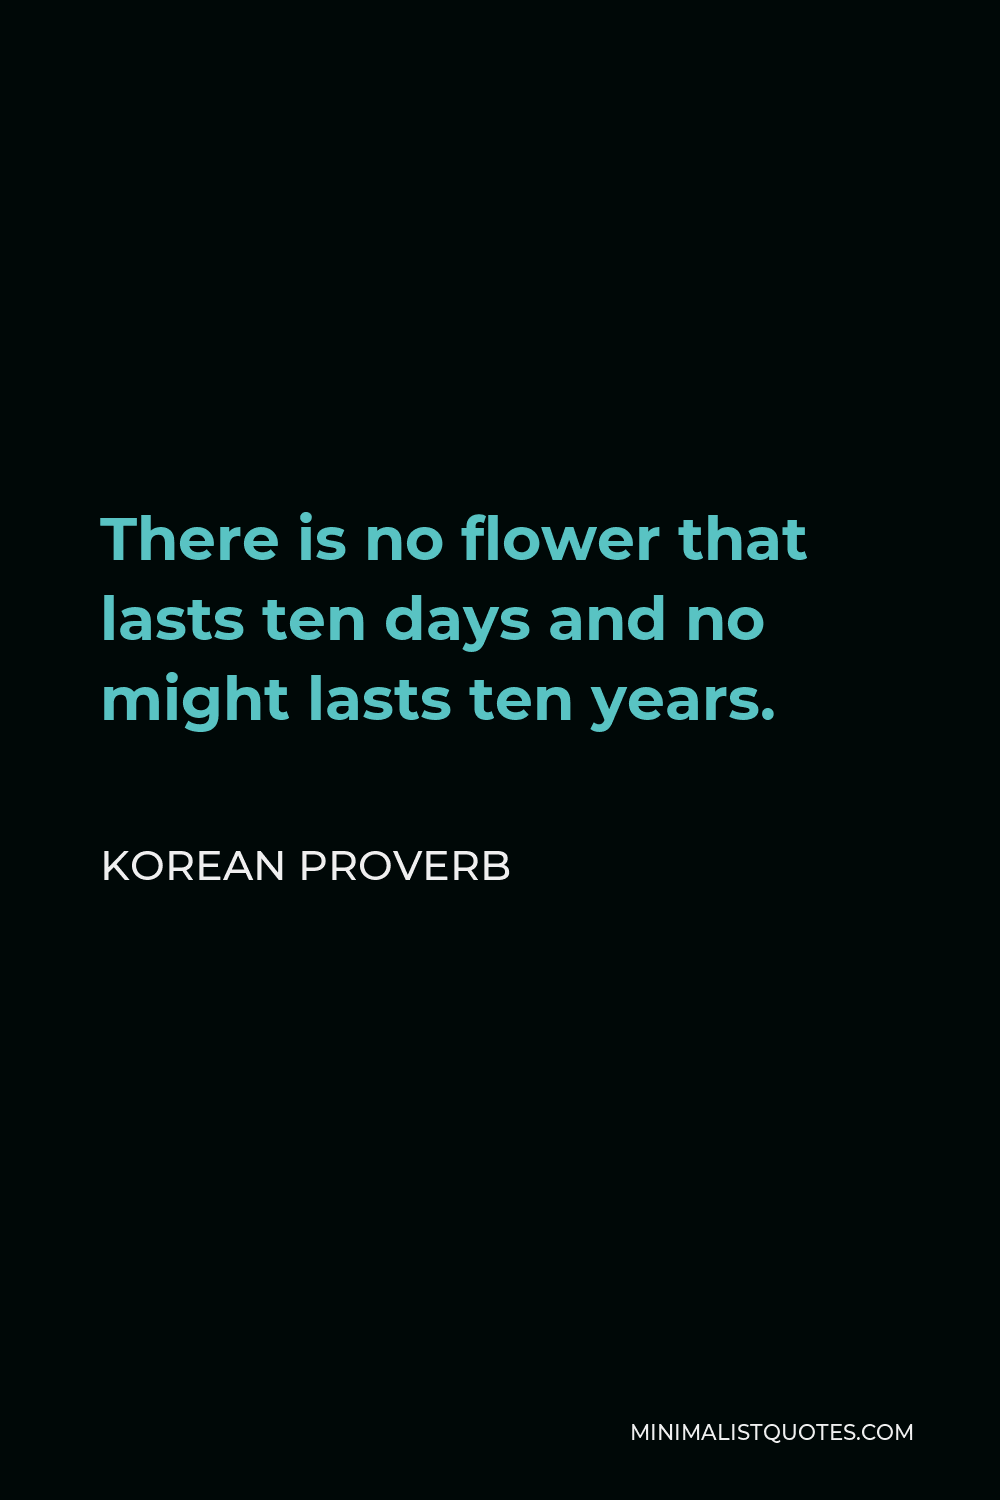 Korean Proverb Quote - There is no flower that lasts ten days and no might lasts ten years.